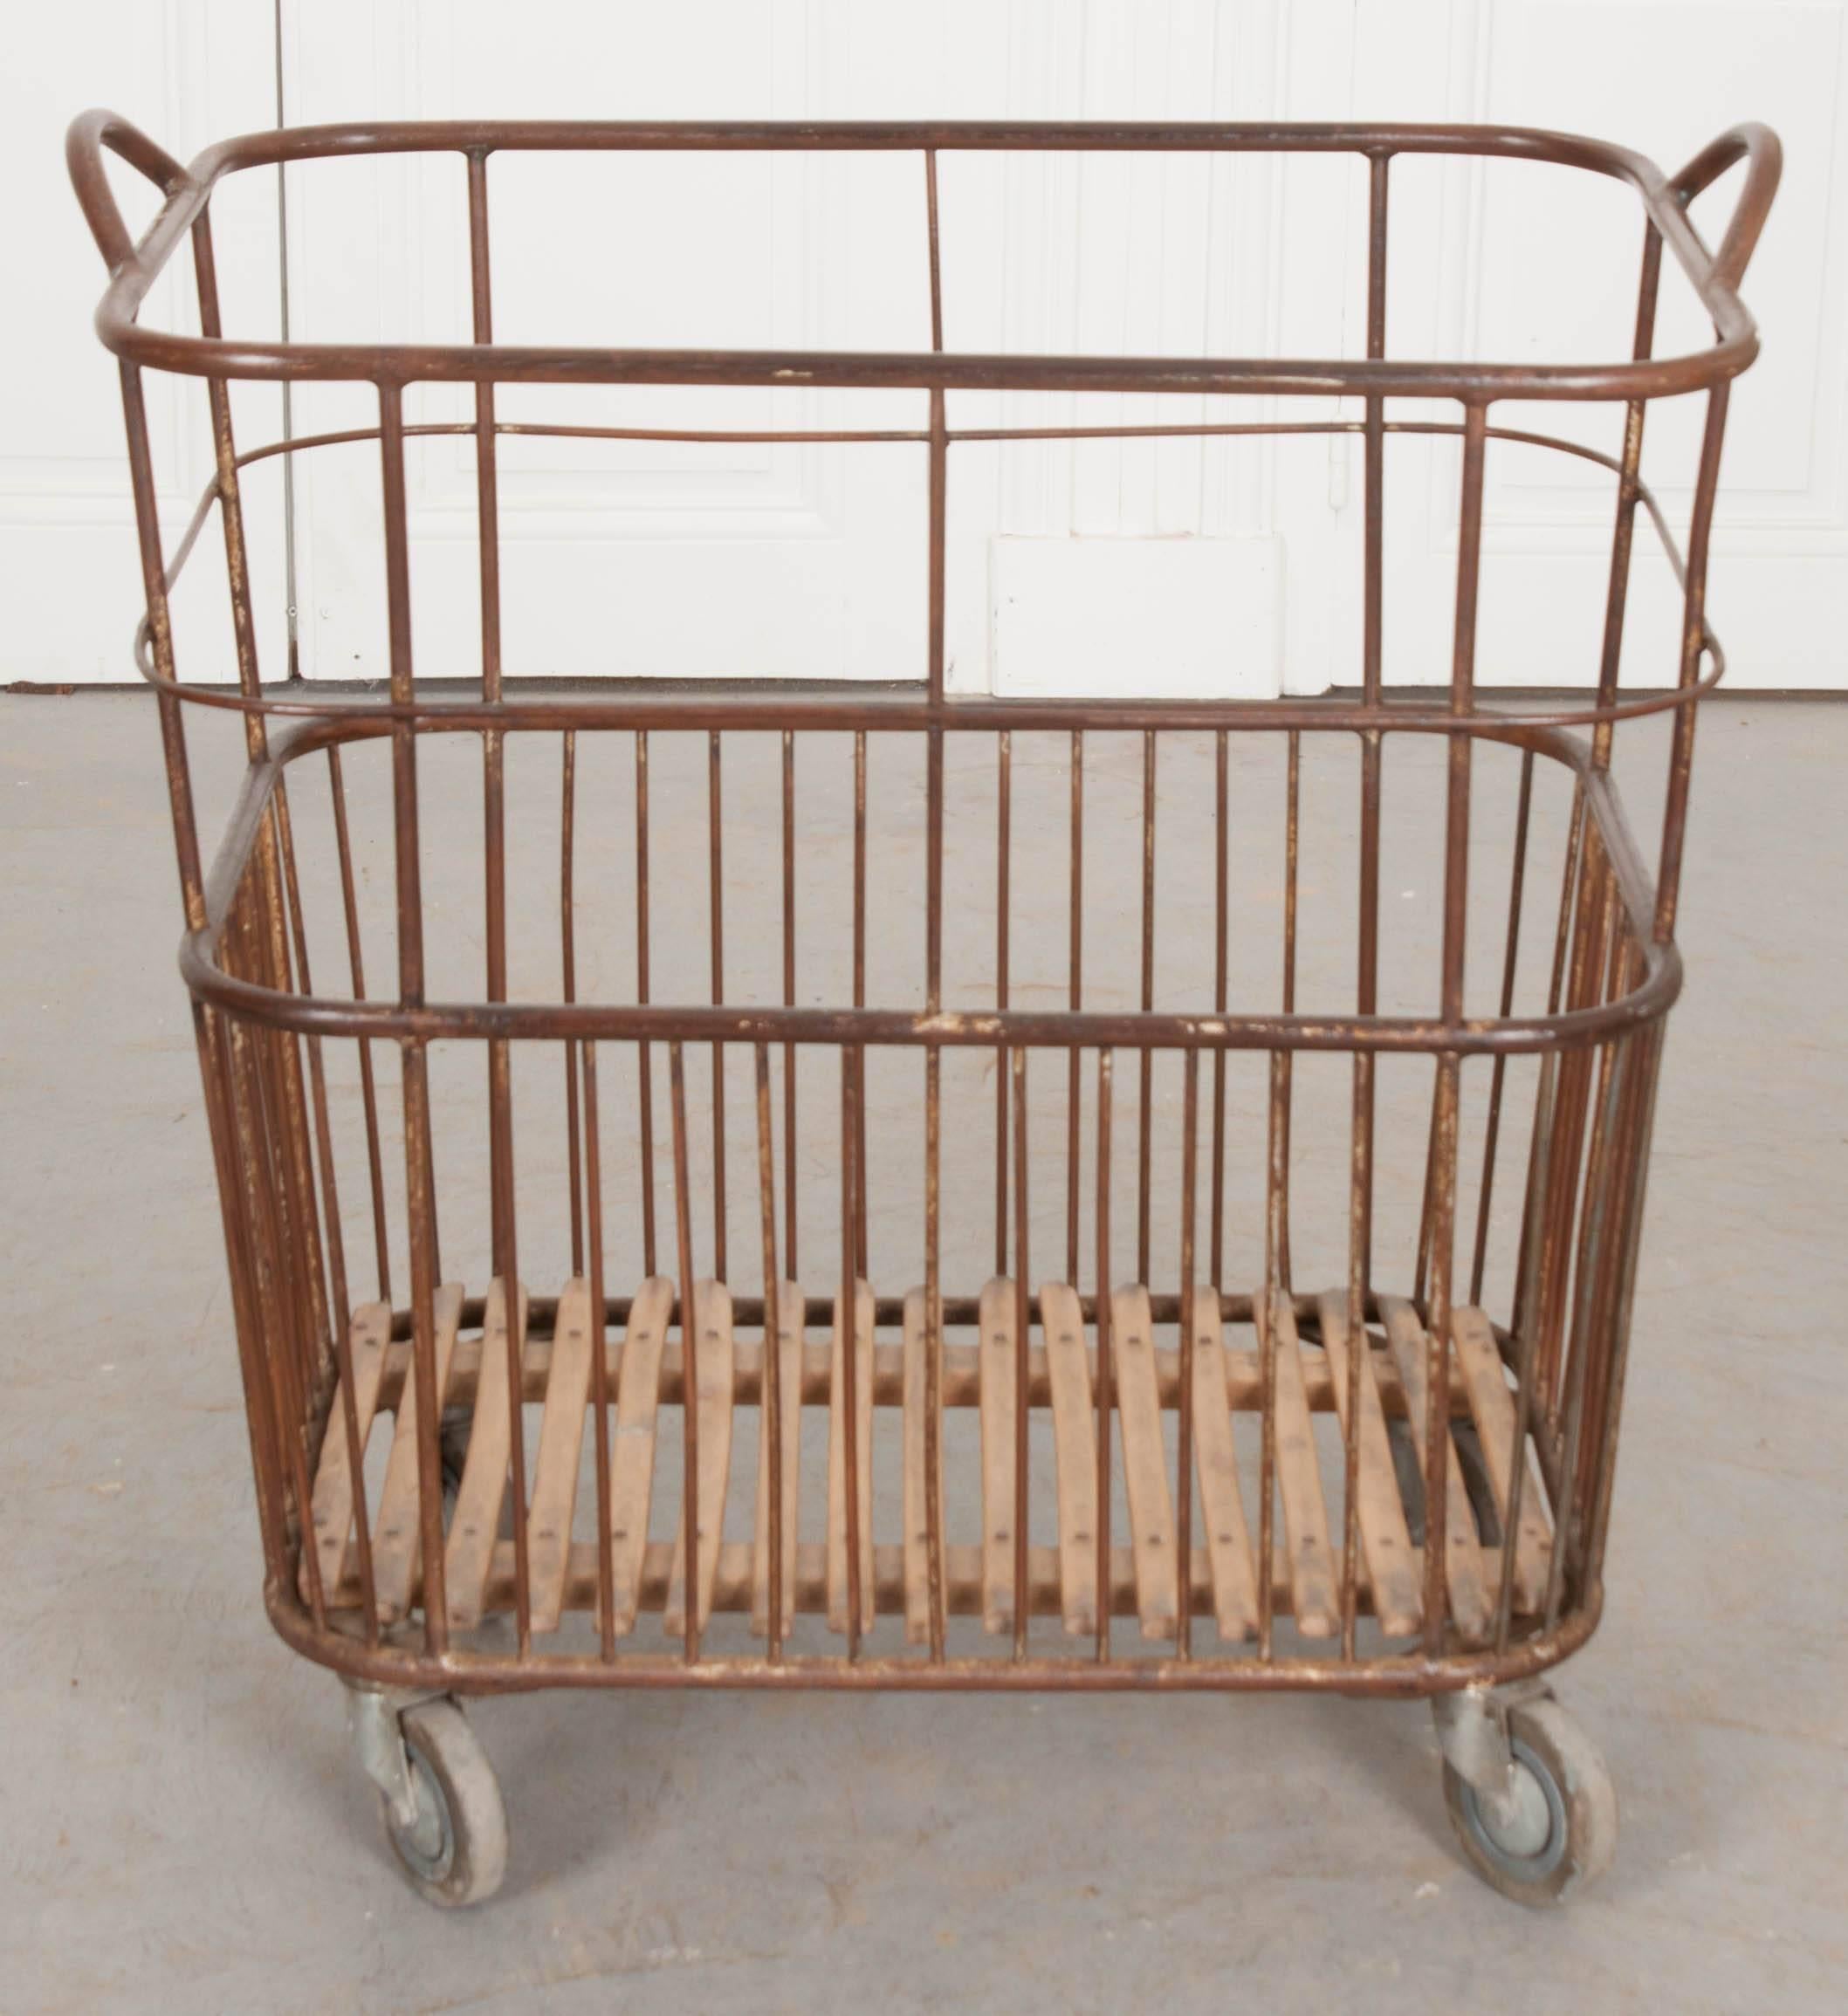 An excellent French bakery or baguette basket from the early part of the 20th century, France. The tall metal basket has two handles and rolls on large caster wheels for easy movement. The bottom is made of wooden slats that have been slowly